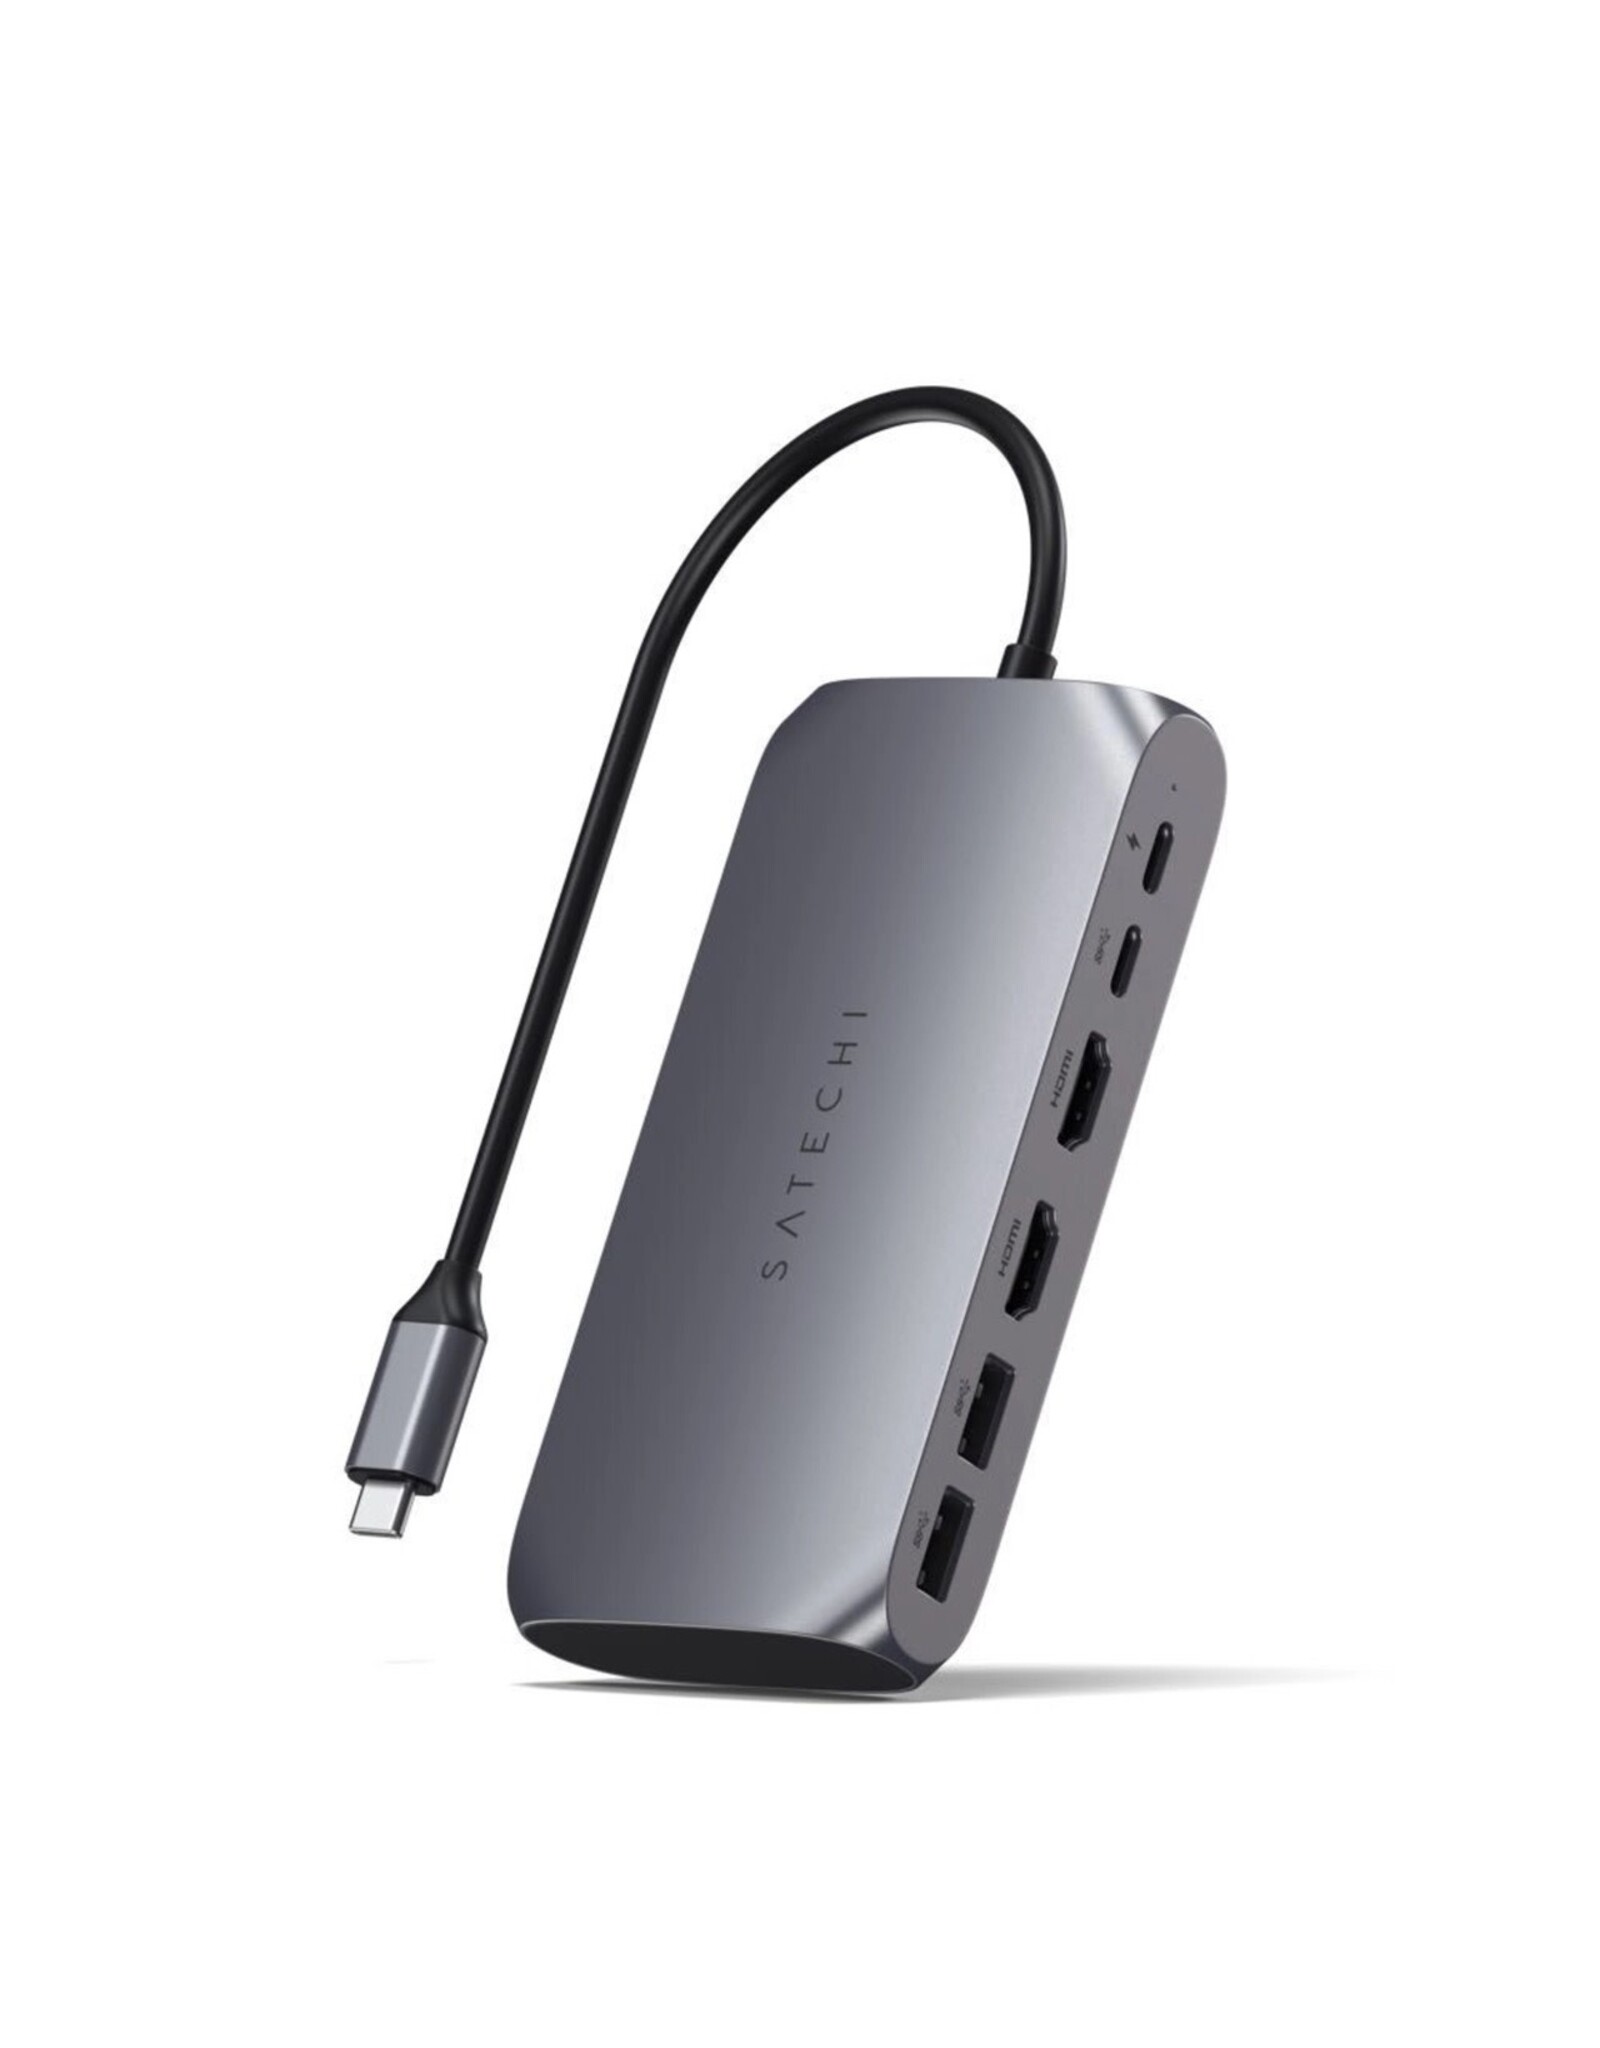 Satechi Satechi USB-C Multimedia Adapter M1, dual external HDMI, USB-C PD charging - up to 85W with SiliconMotion